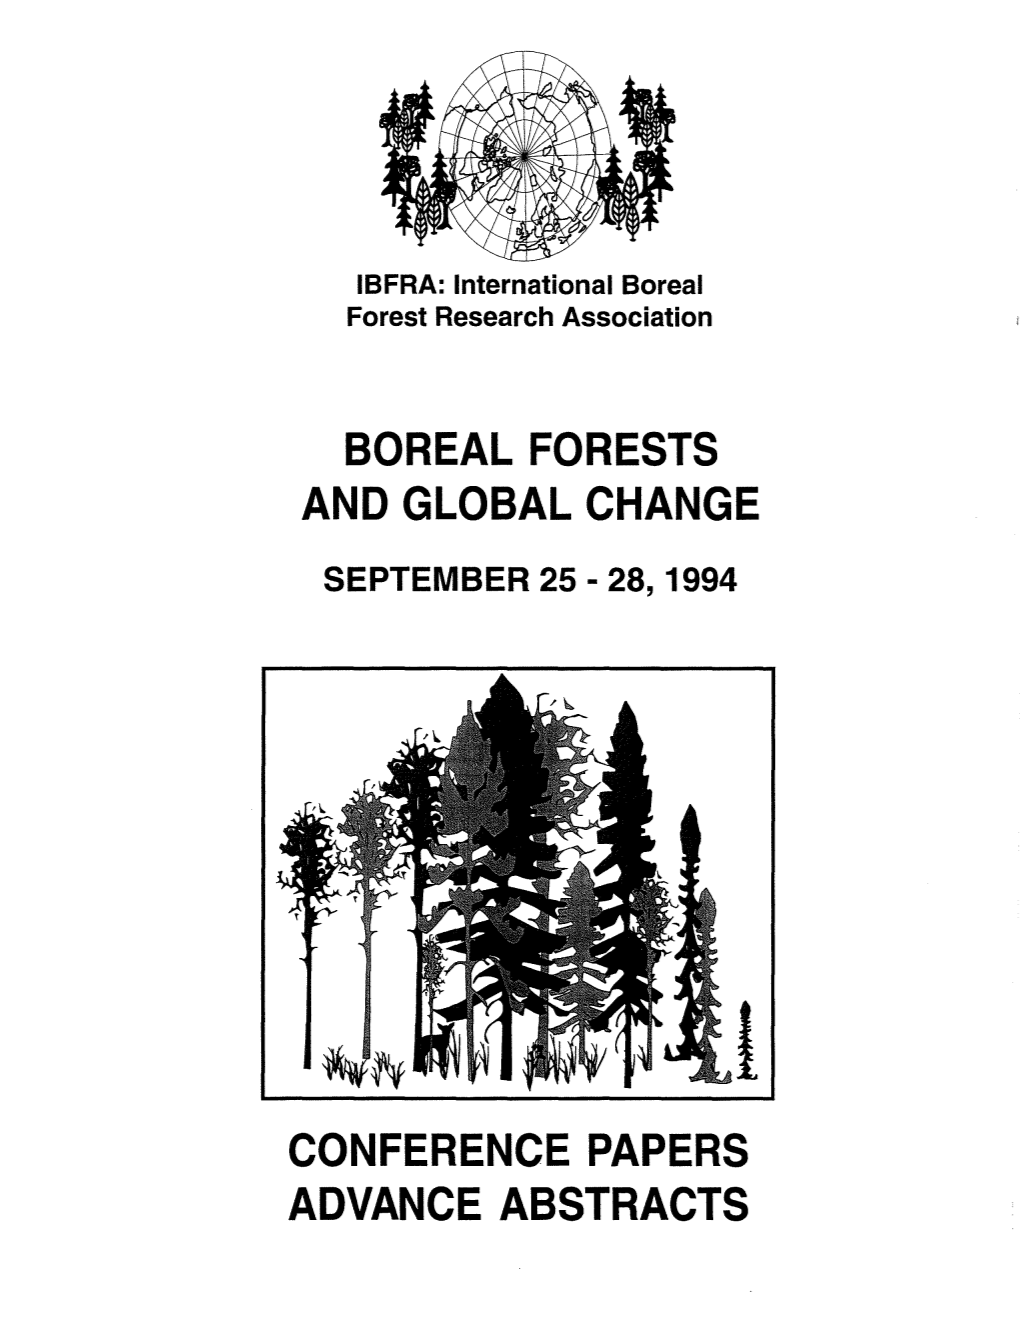 Boreal Forests and Global Change Conference Papers